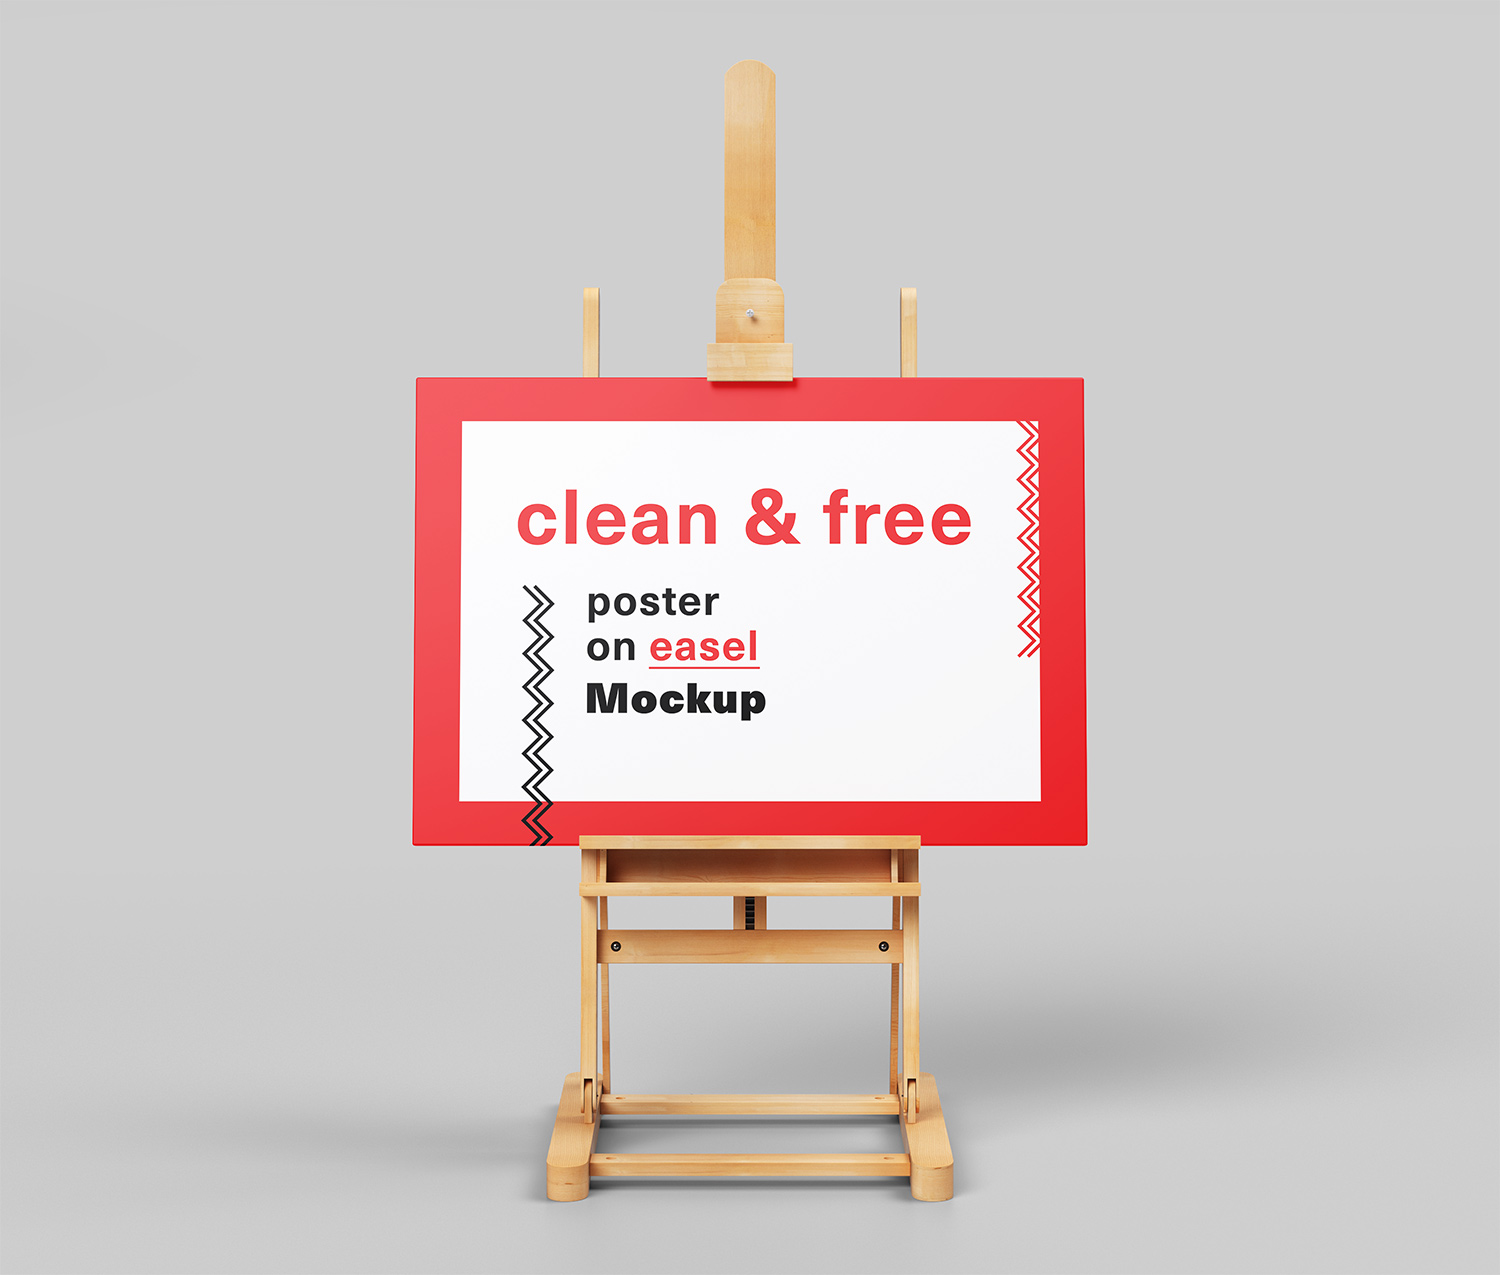 Canvas-Poster-on-Easel-Mockup-Free-04